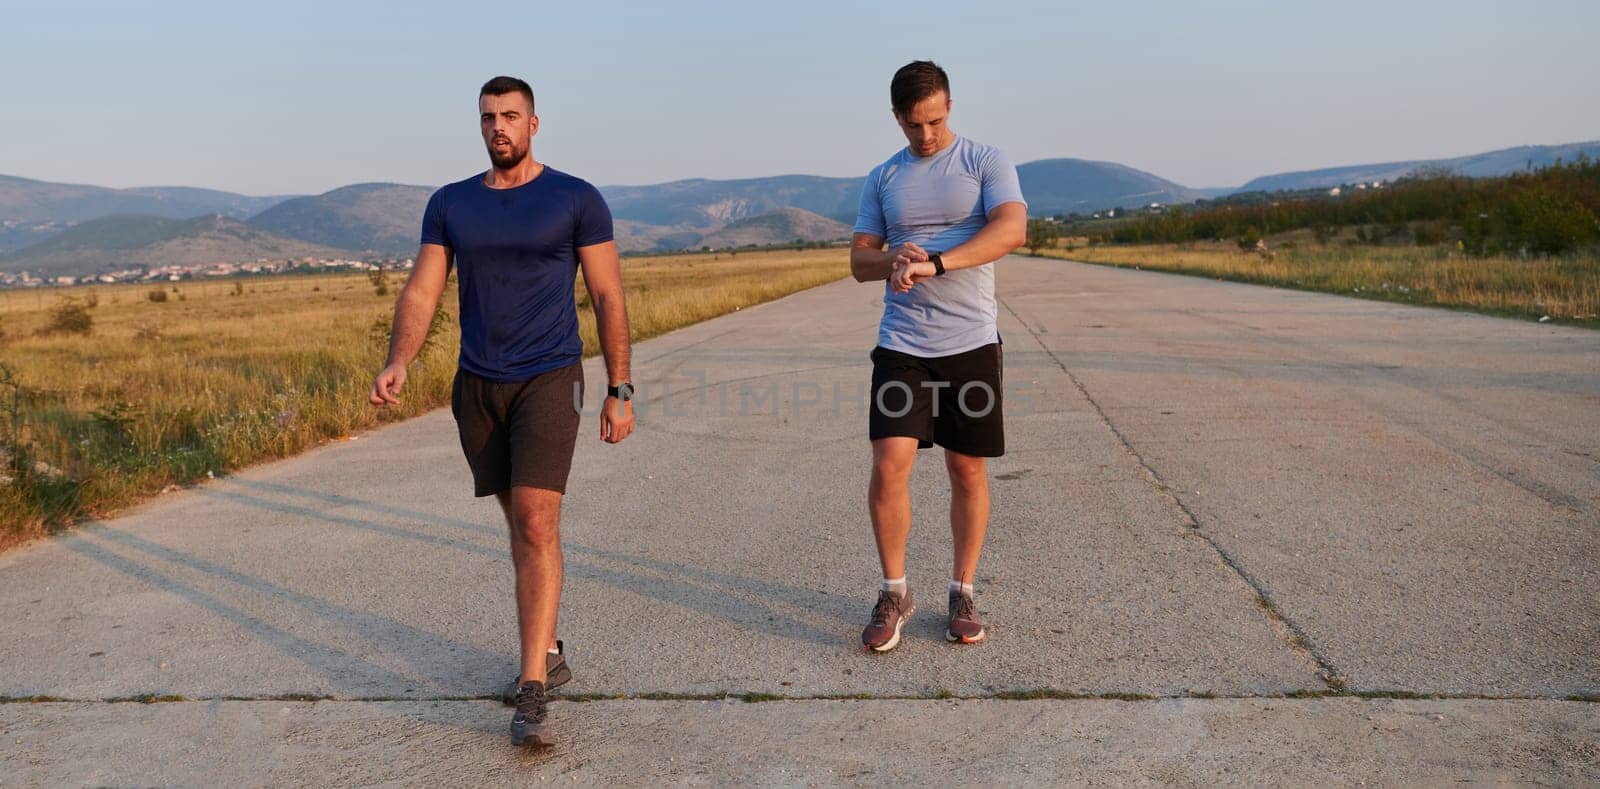 In anticipation of an upcoming marathon competition, two athletic friends train side by side, embodying the spirit of teamwork, dedication, and mutual support in their shared fitness journey.